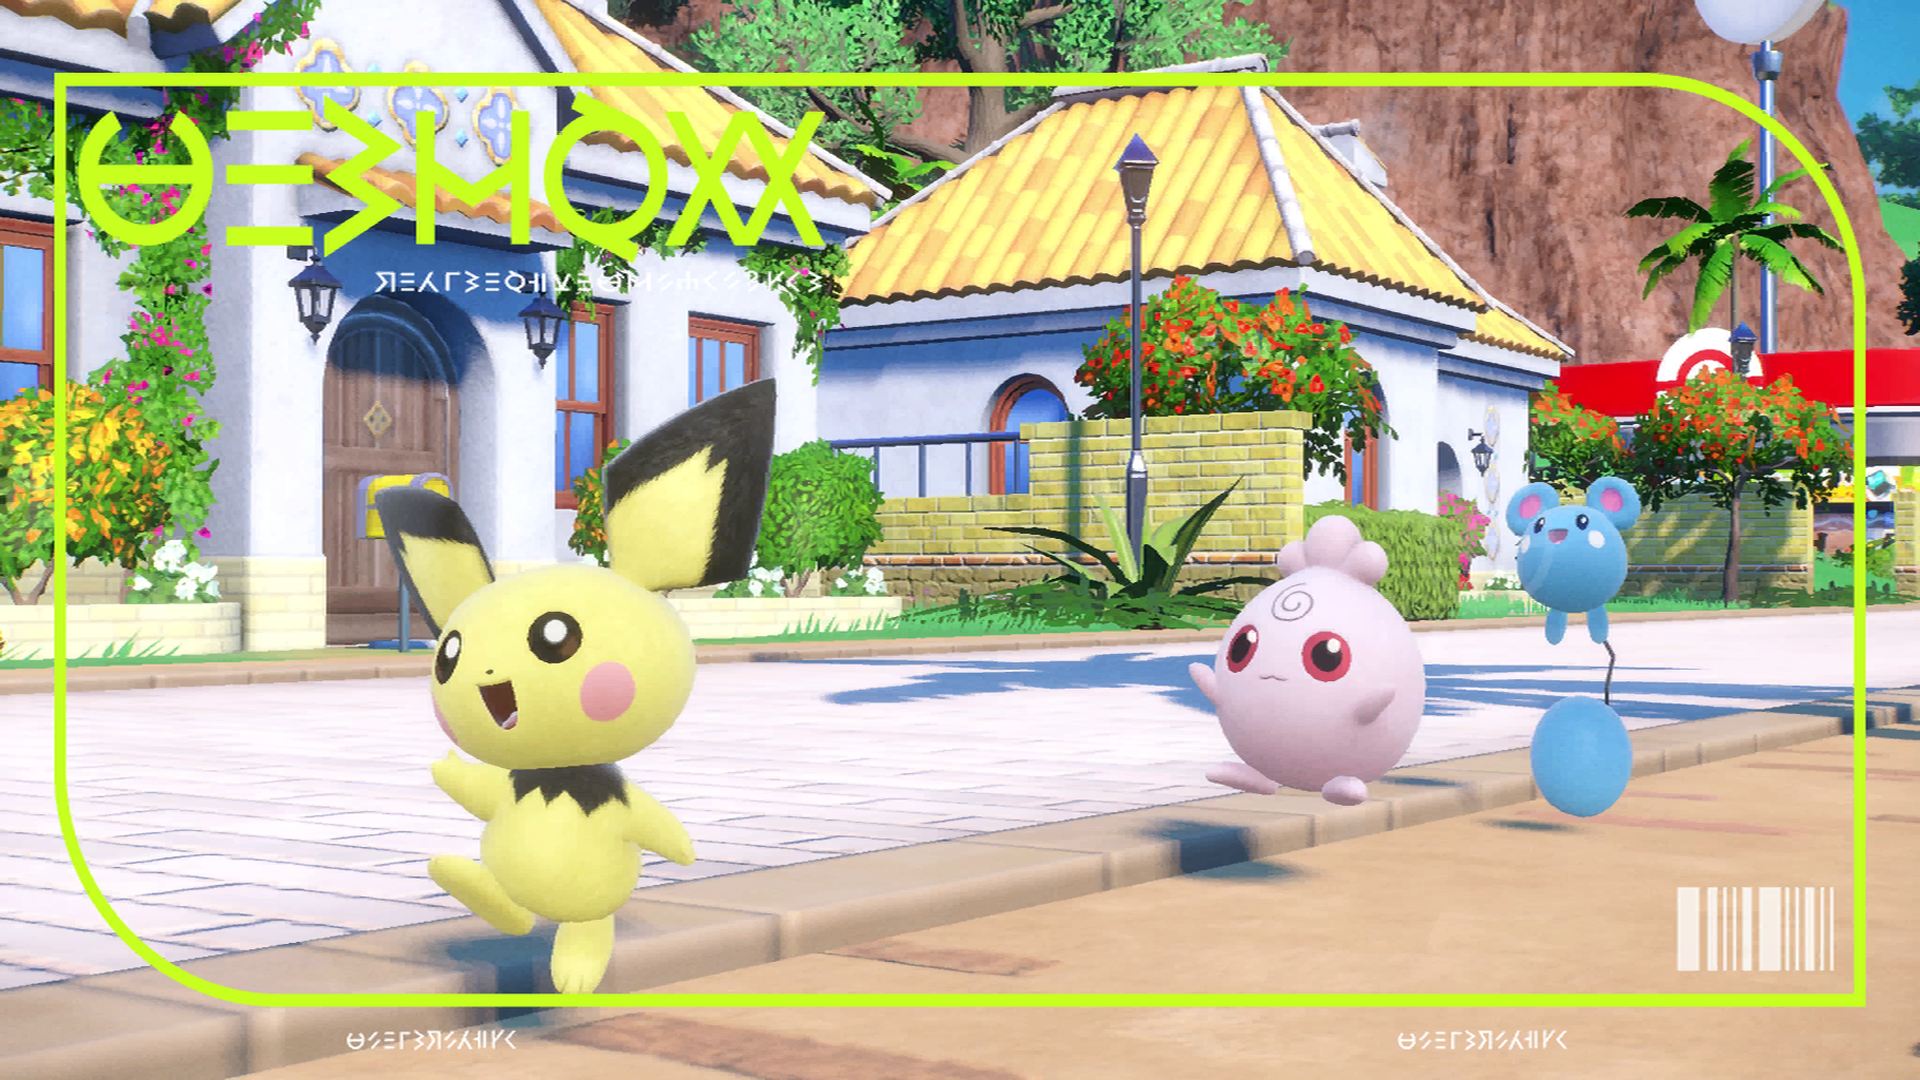 How to Evolve Pichu into Pikachu and Raichu in Pokémon Scarlet and Violet